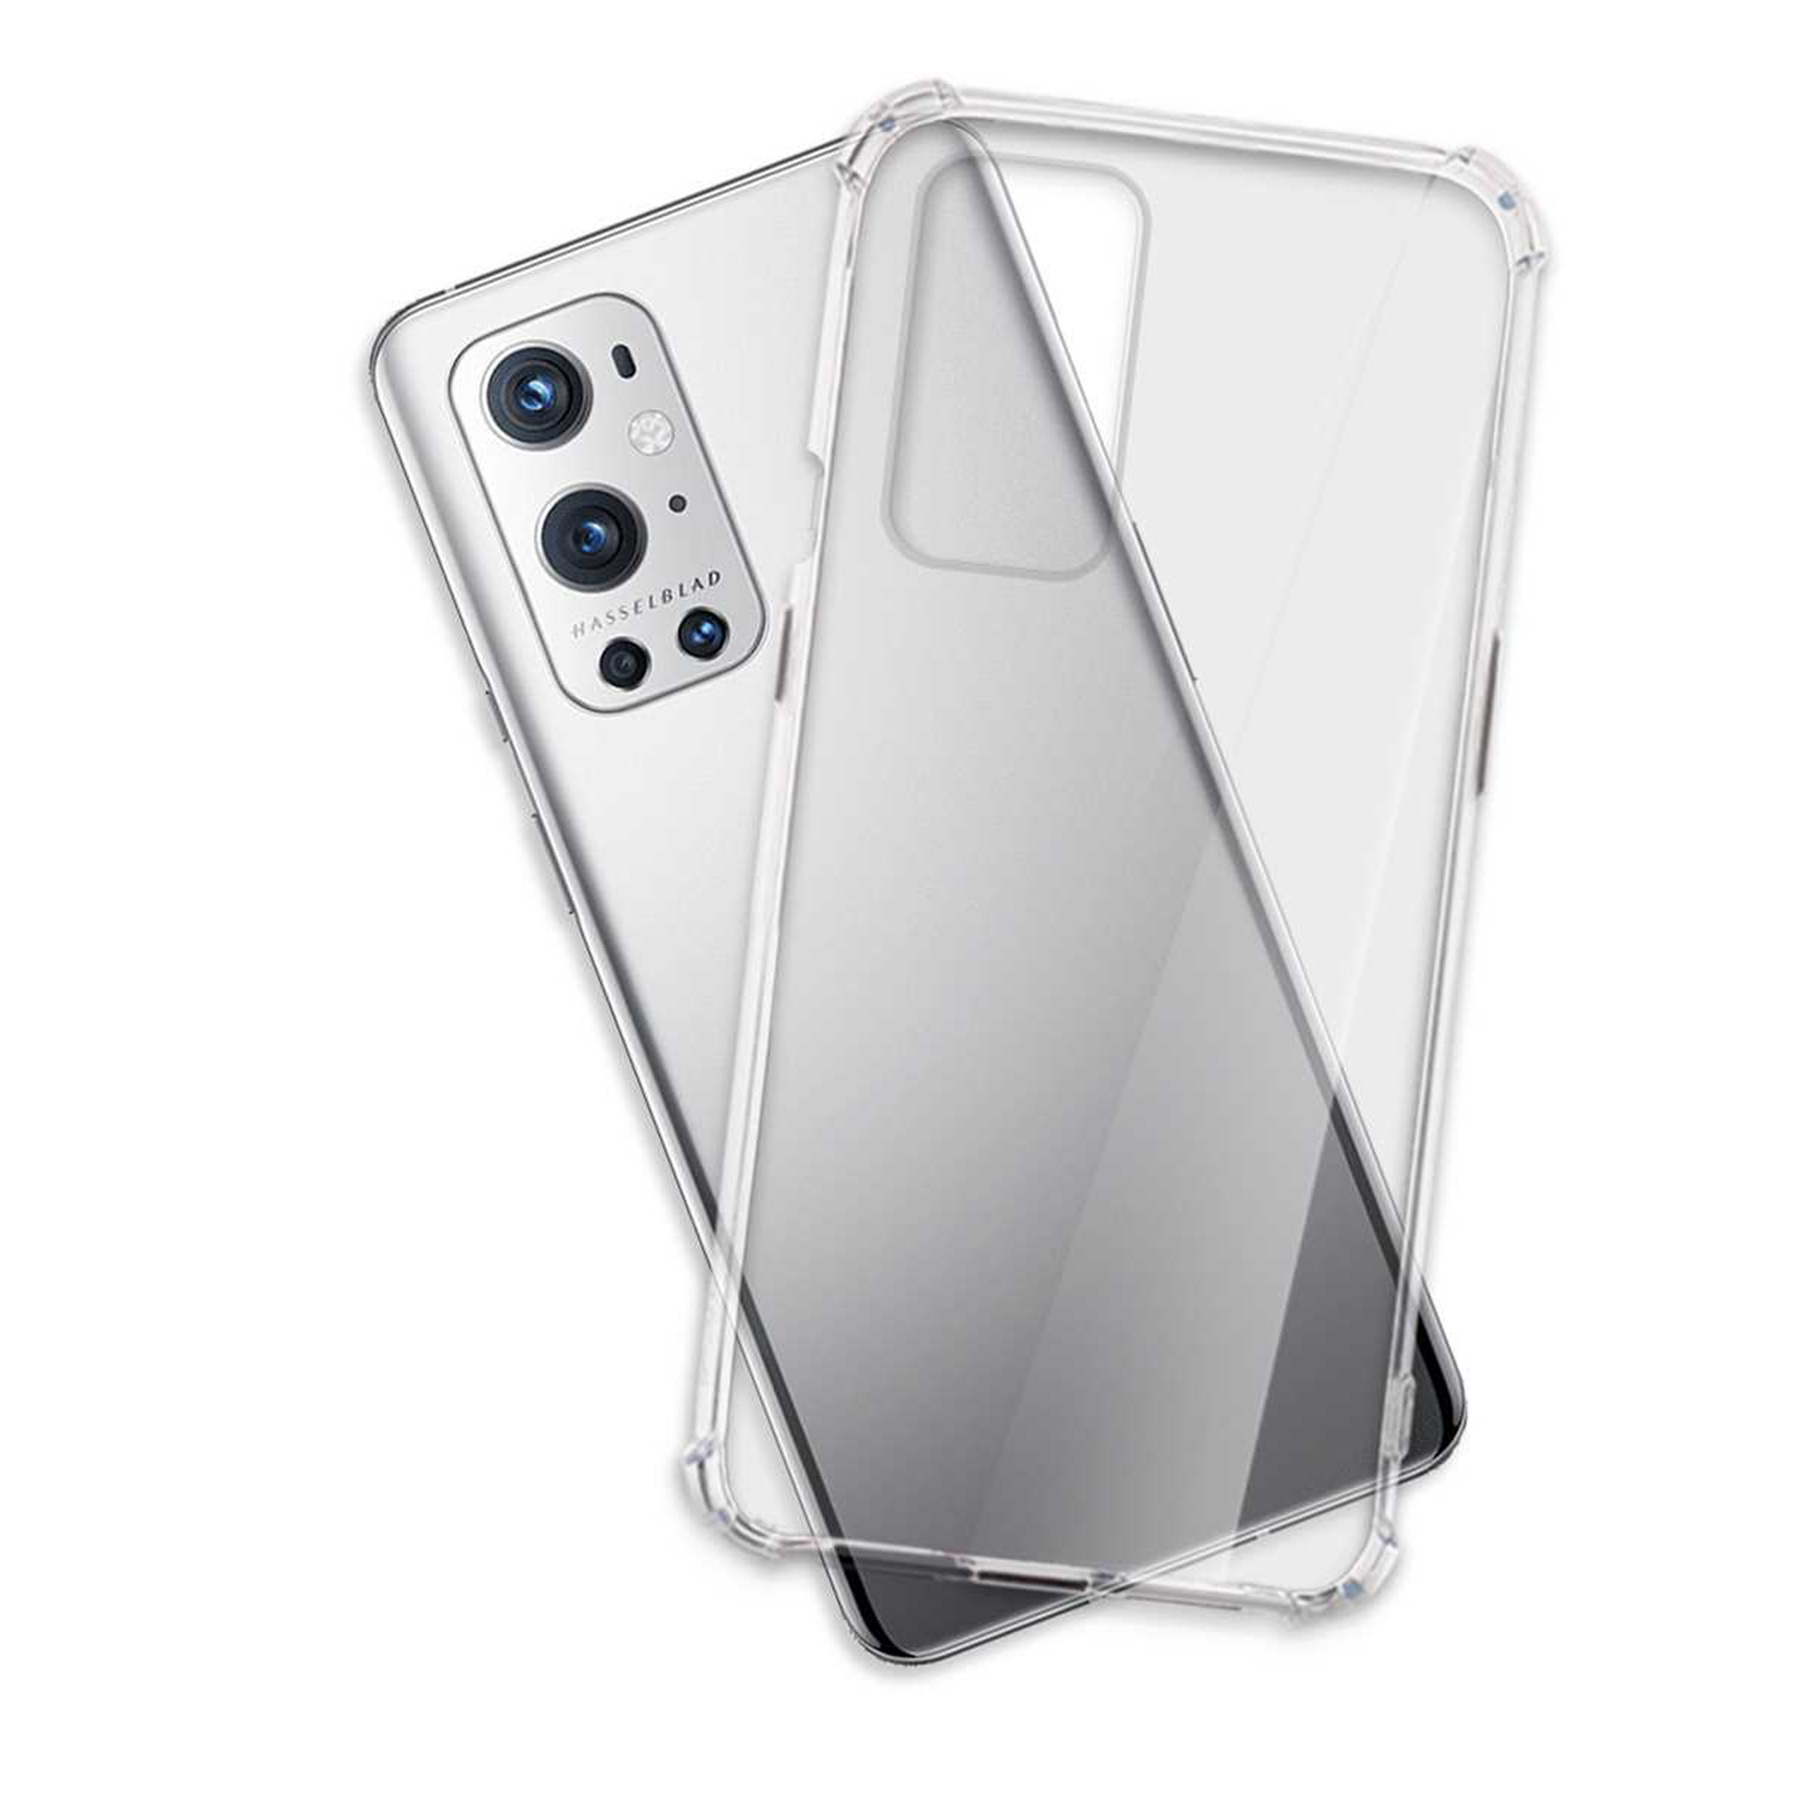 MTB MORE ENERGY Clear 9, Armor Backcover, OnePlus, Transparent Case